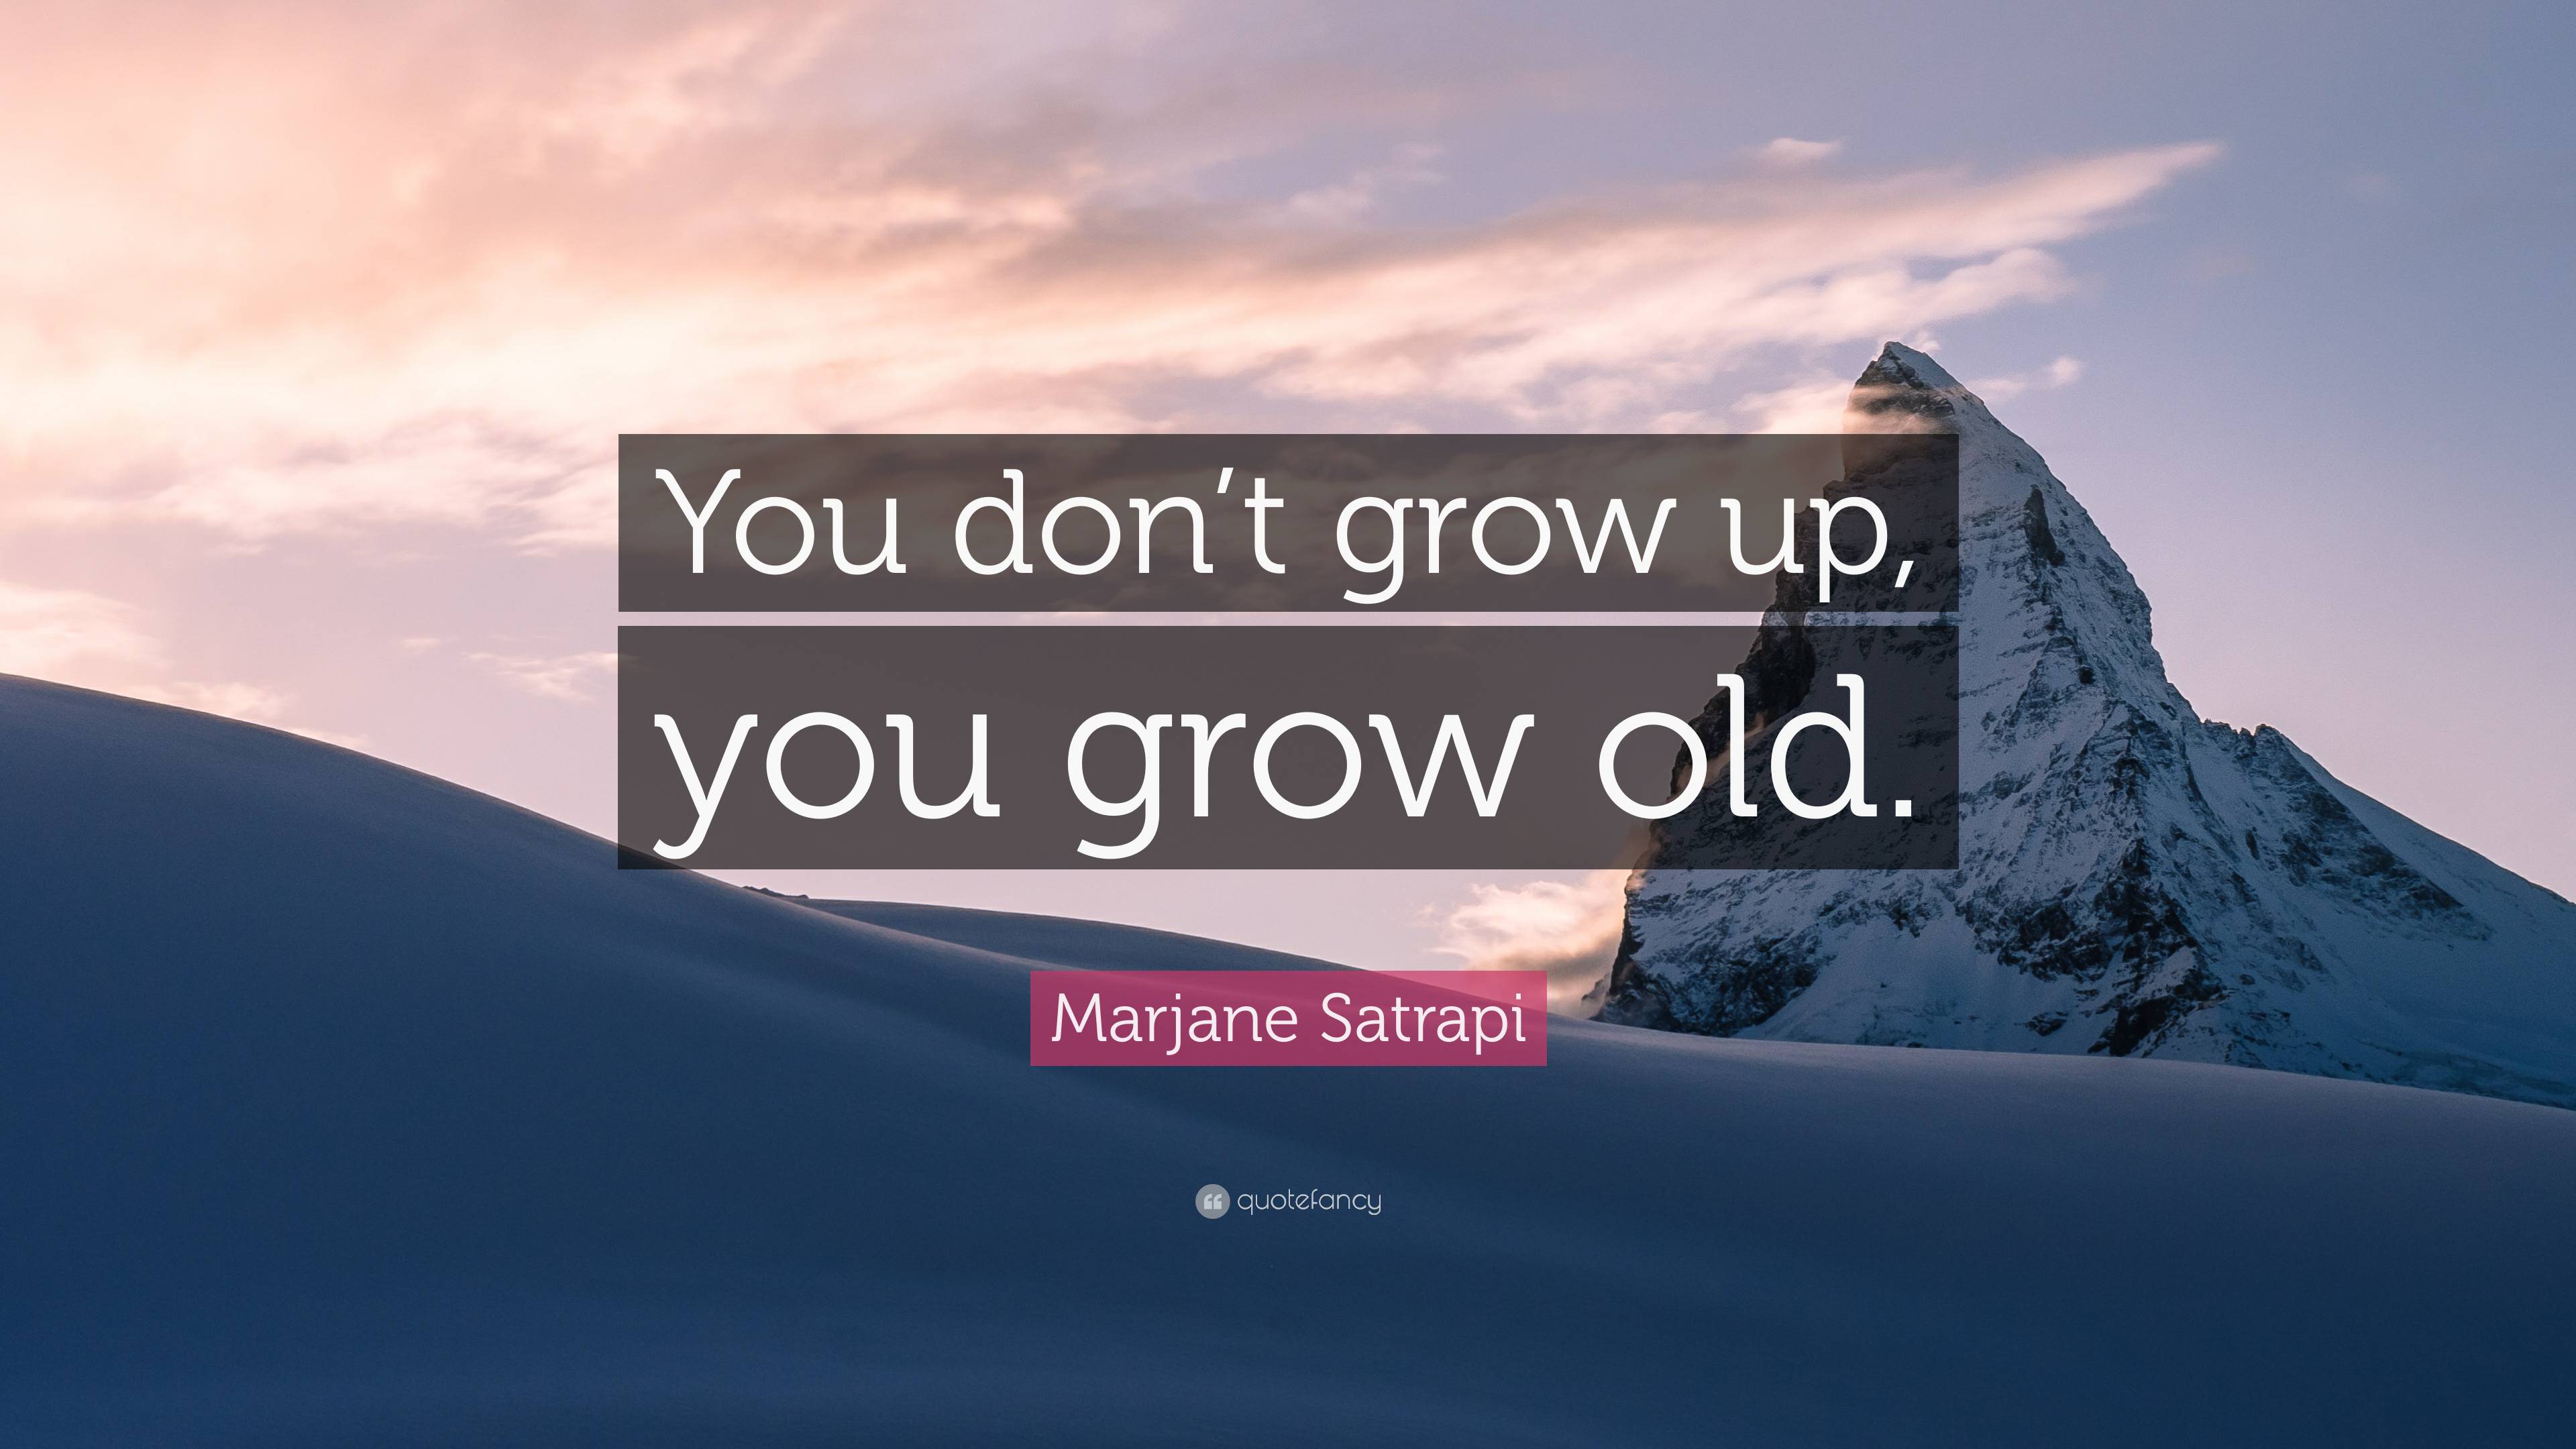 Marjane Satrapi Quote: “You don't grow up, you grow old.”